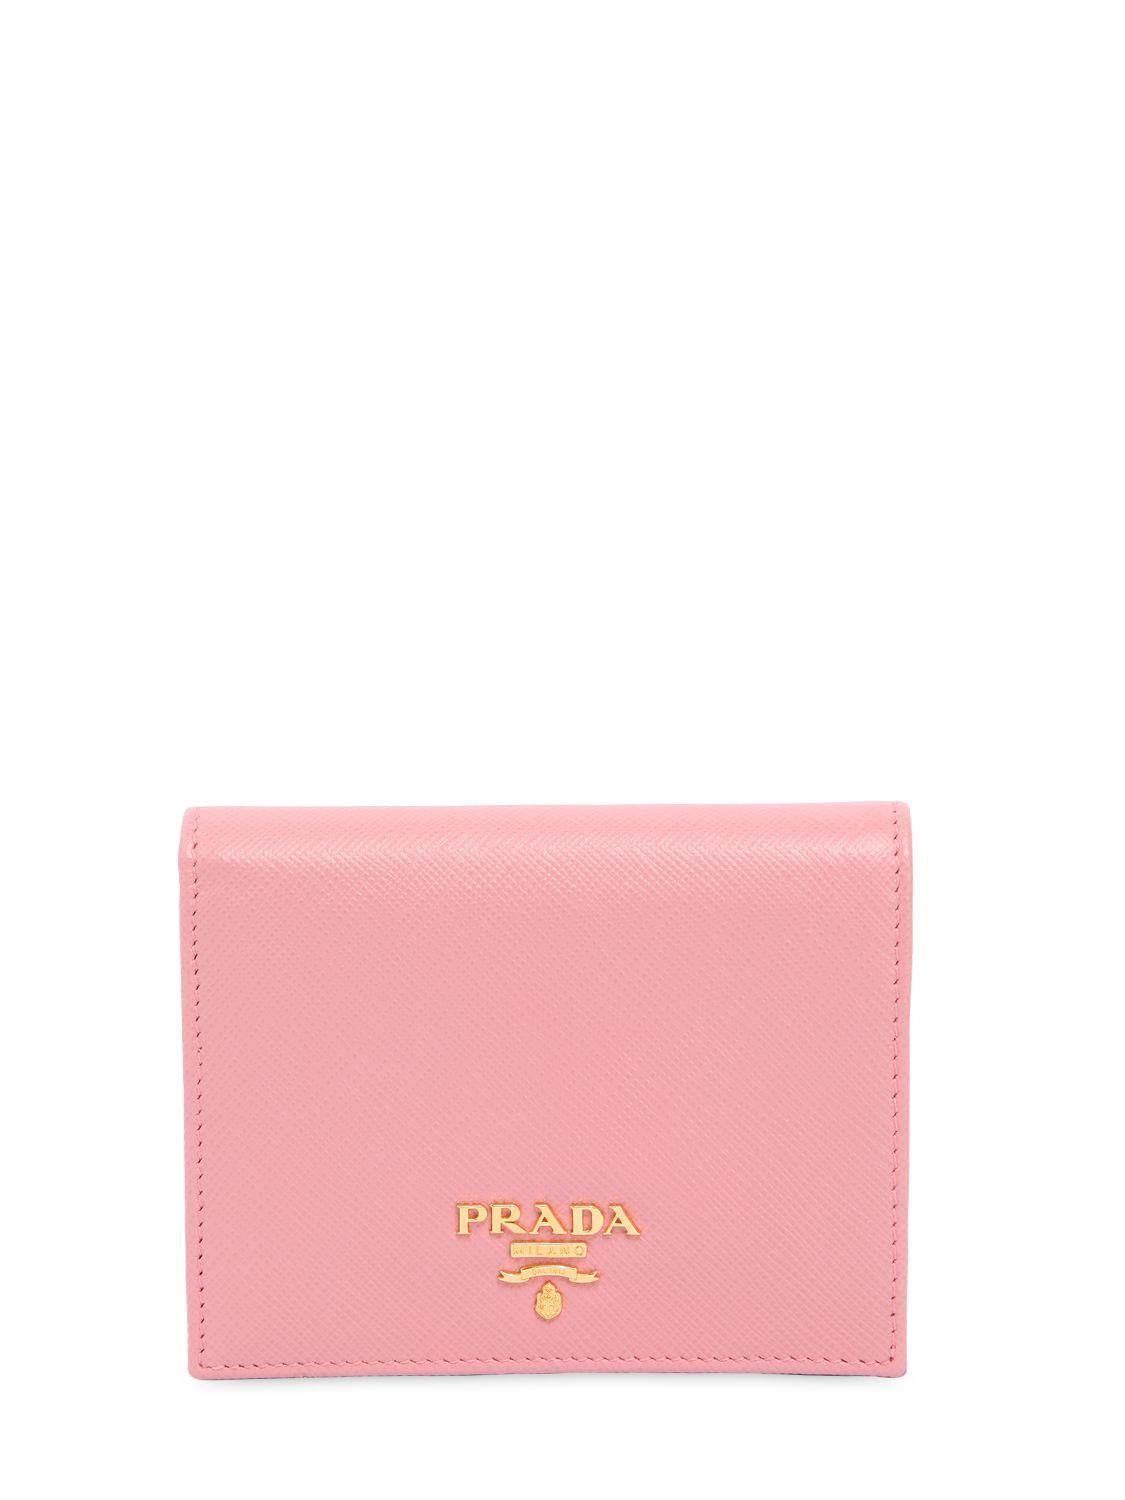 Prada Leather Wallet - Pink for Women